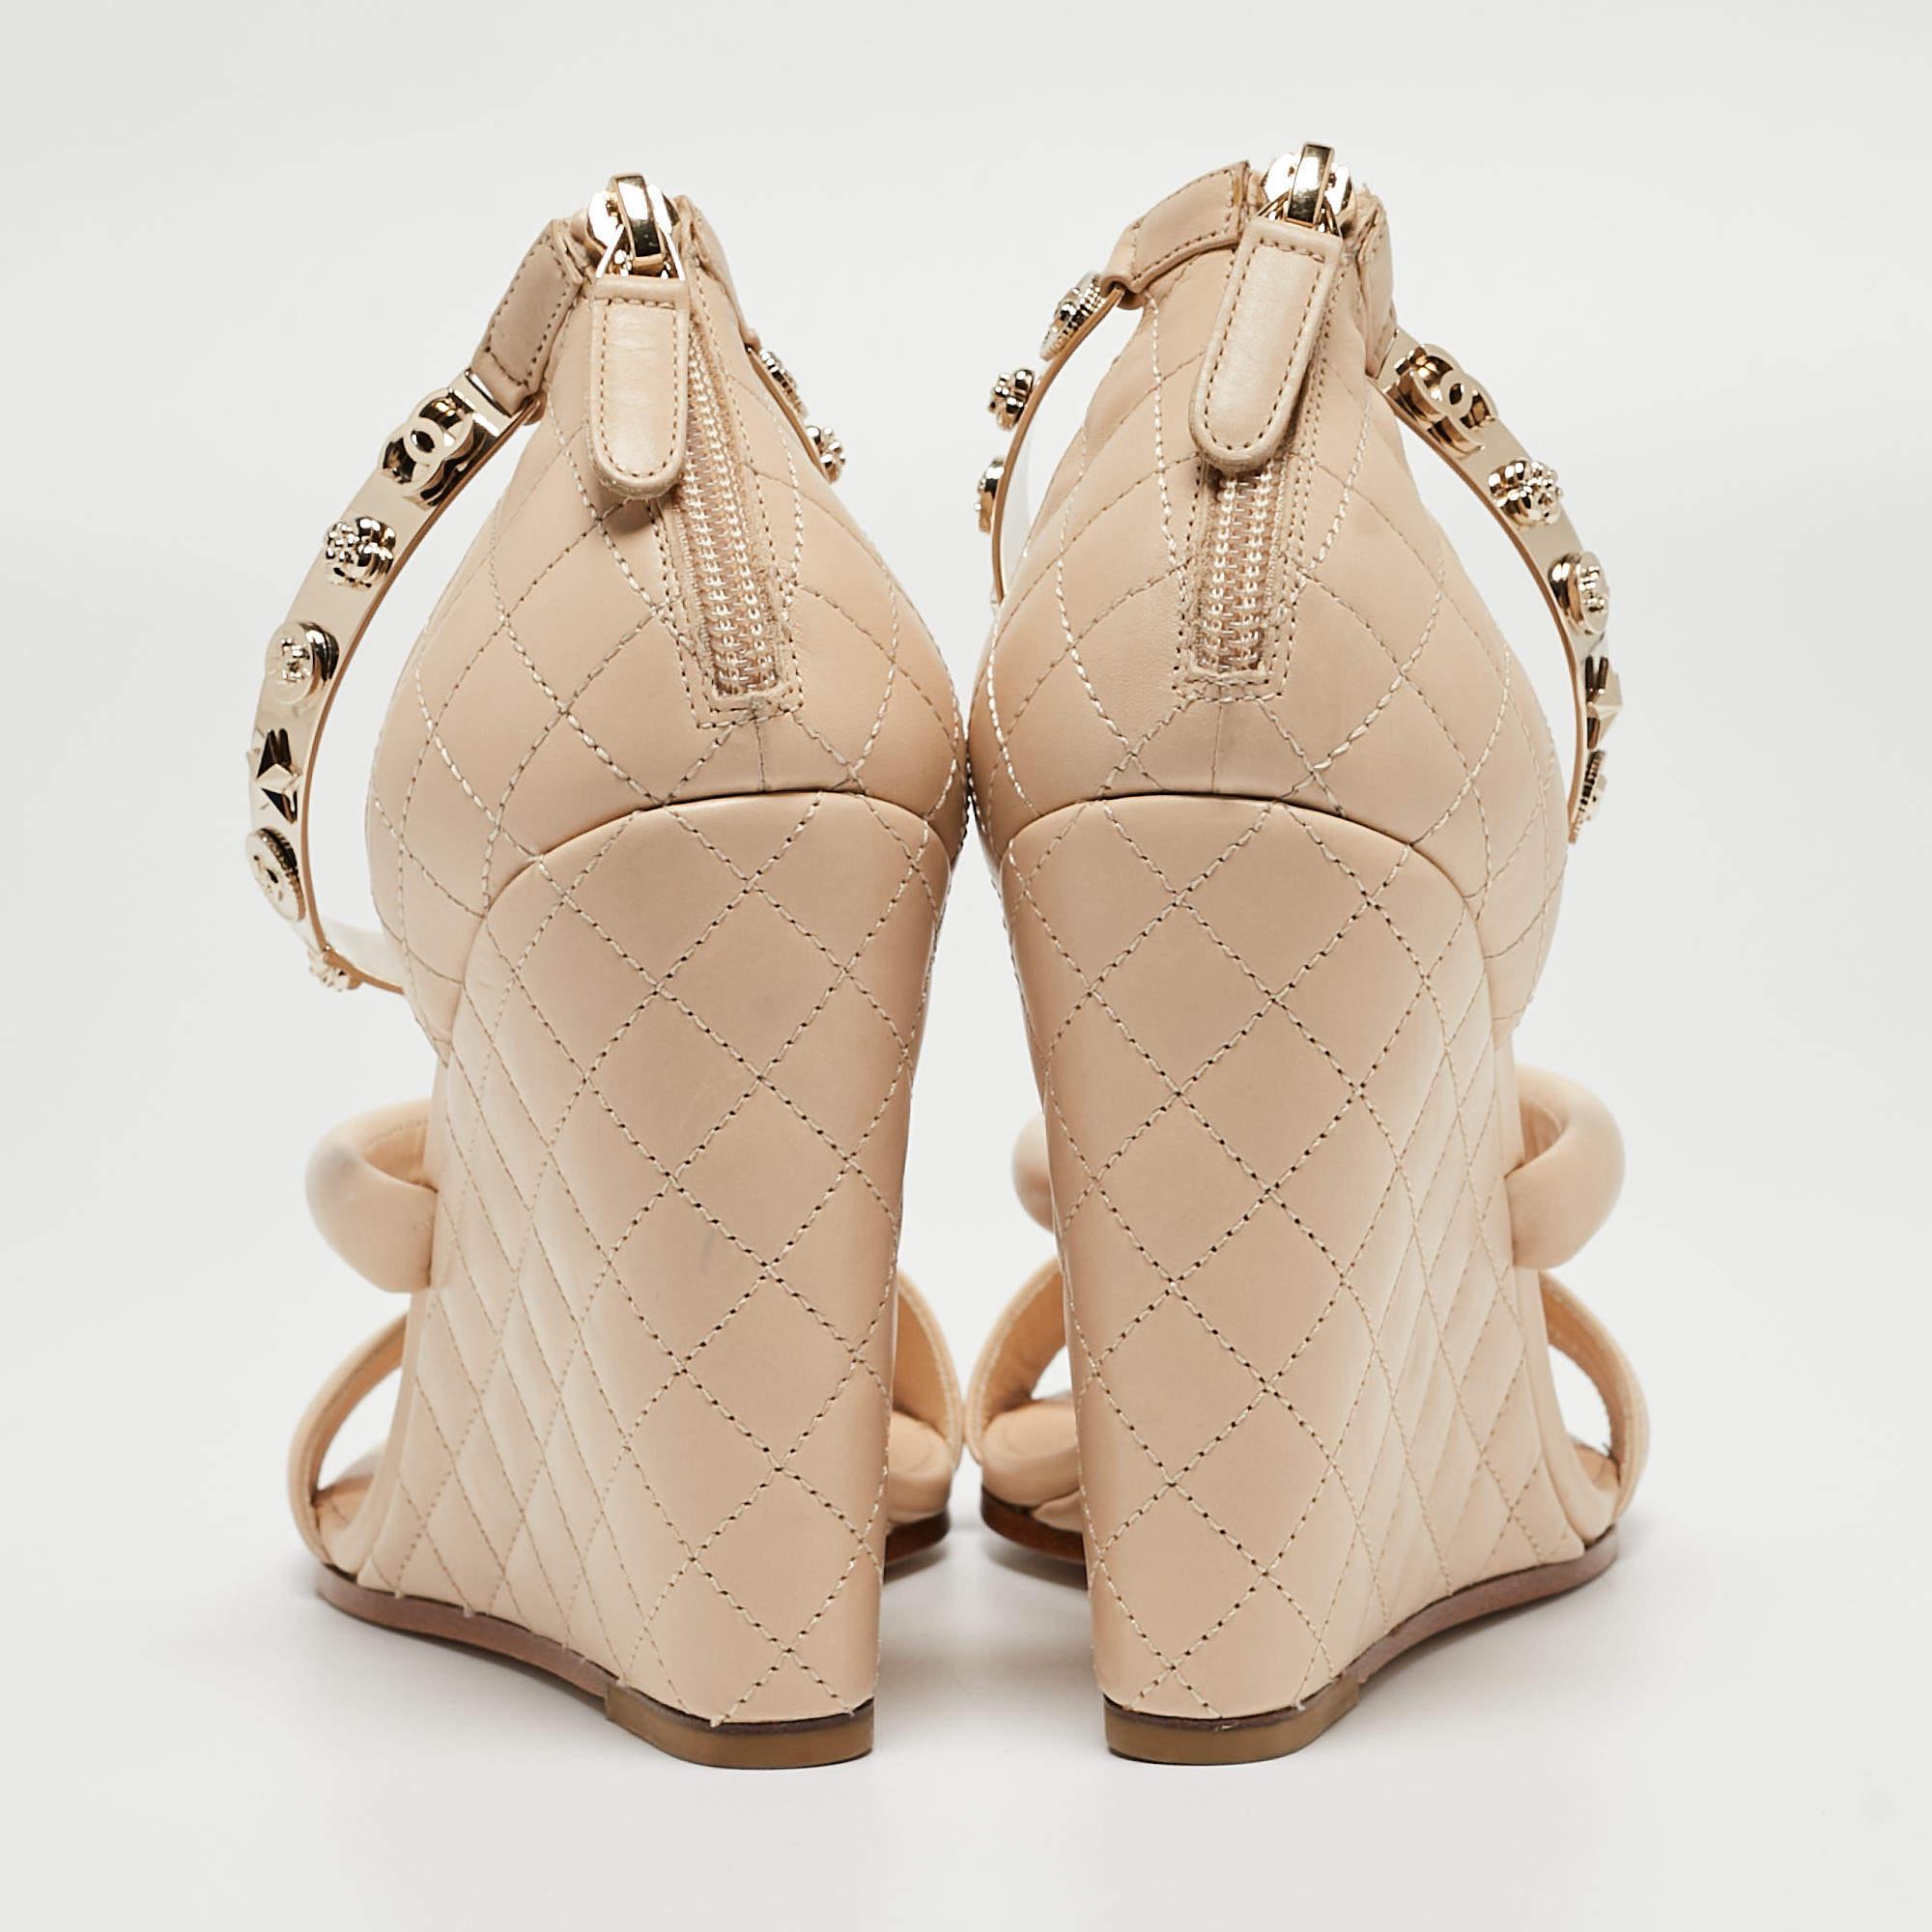 Chanel Beige Quilted Leather Charm Embellished Ankle Cuff Wedge Sandals Size 39 In Excellent Condition For Sale In Dubai, Al Qouz 2